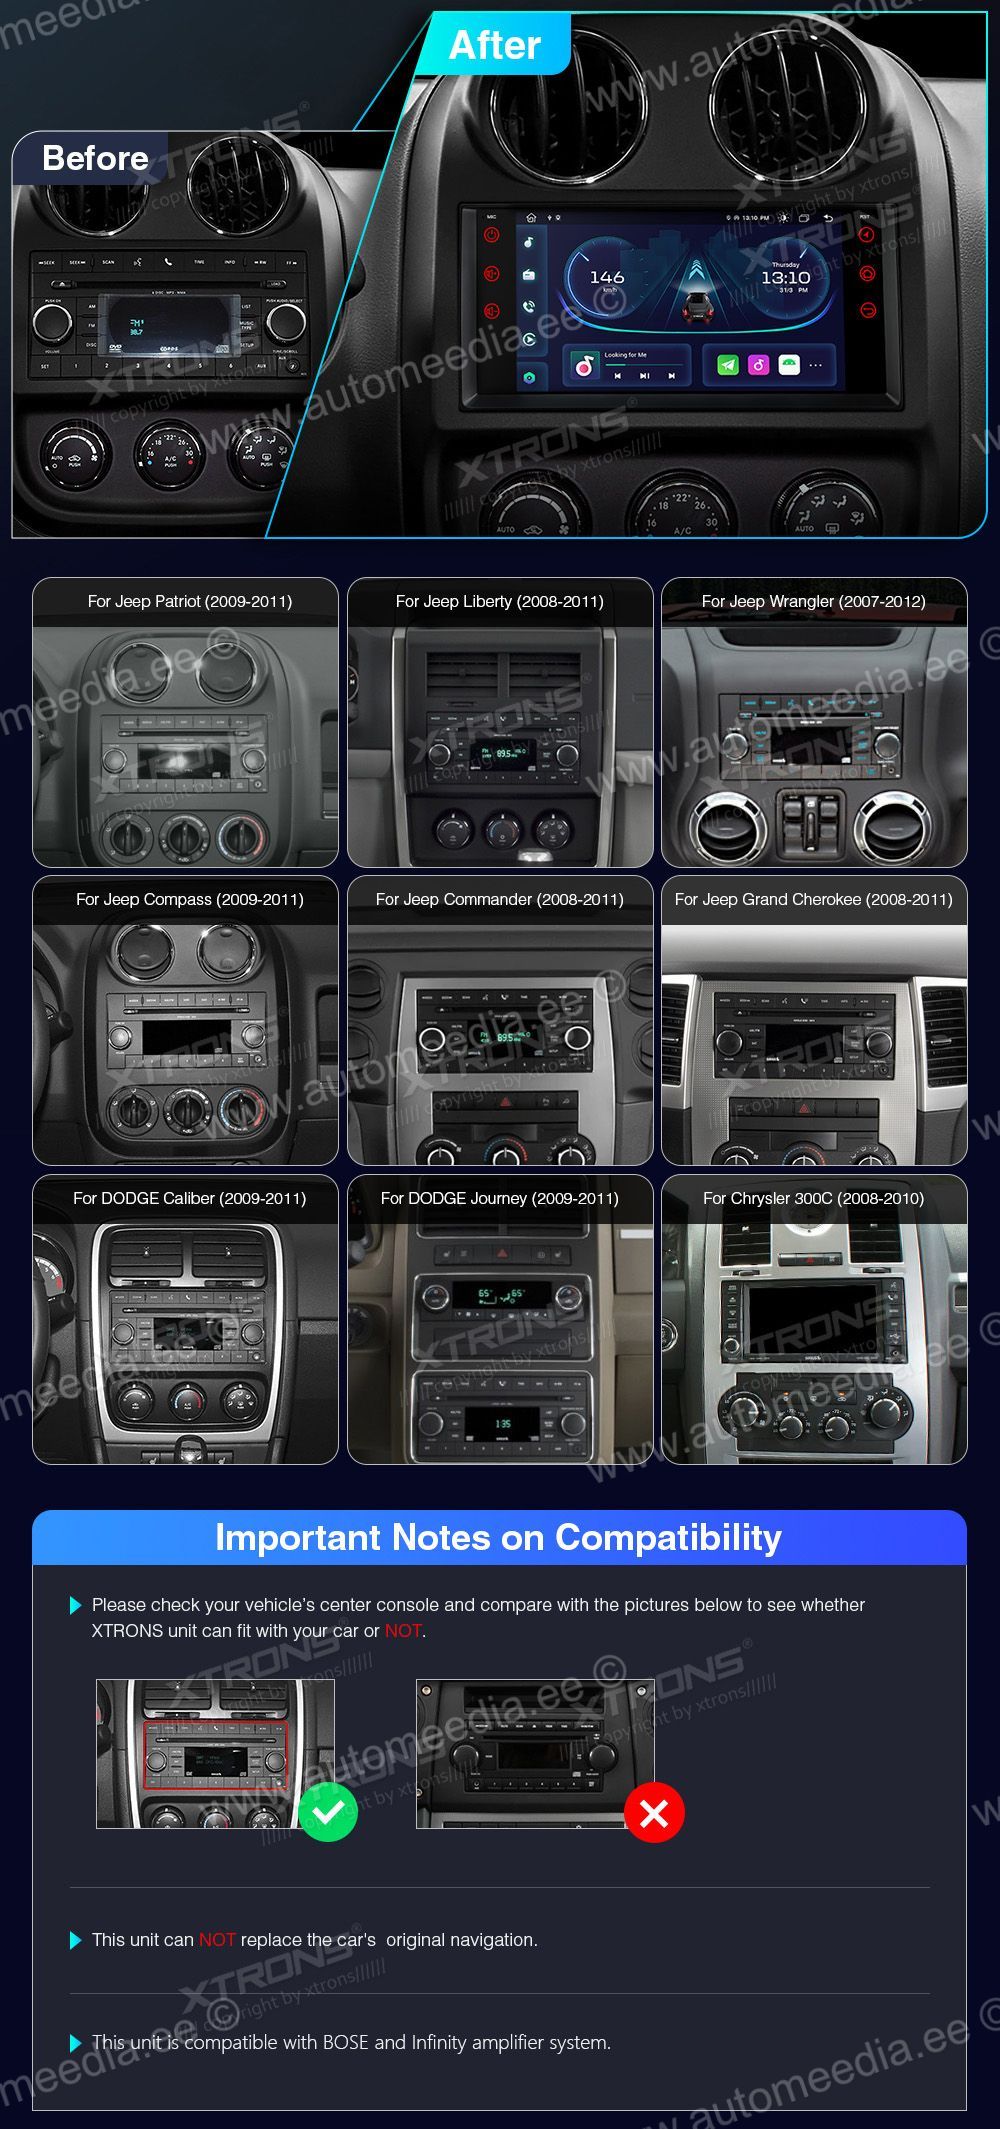 Jeep | Dodge | Chrysler | Grand Cherokee | Compass | Patriot | 300C  custom fit multimedia radio suitability for the car